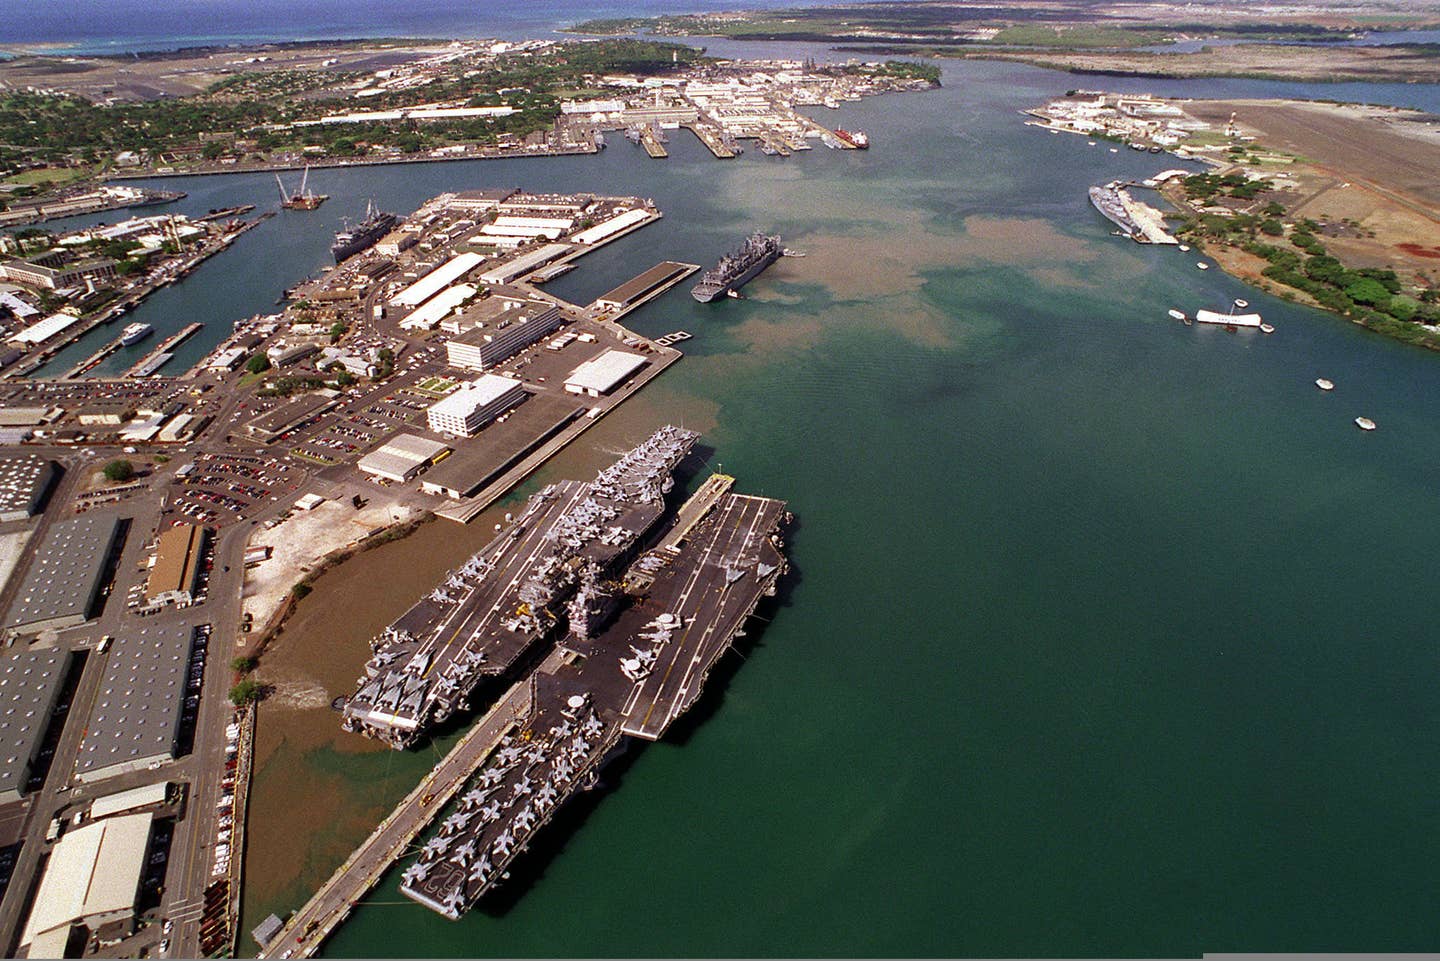 The aircraft carriers USS Kitty Hawk (CV-63), left, and USS <em>Independence</em> (CV-62), right, tied up at the same dock at Naval Station Pearl Harbor during exercise RIMPAC in 1998. <em>Kitty Hawk</em>&nbsp;was in the process of replacing&nbsp;<em>Independence</em>&nbsp;as the forward-deployed carrier in Japan. <em>U.S. Navy</em>